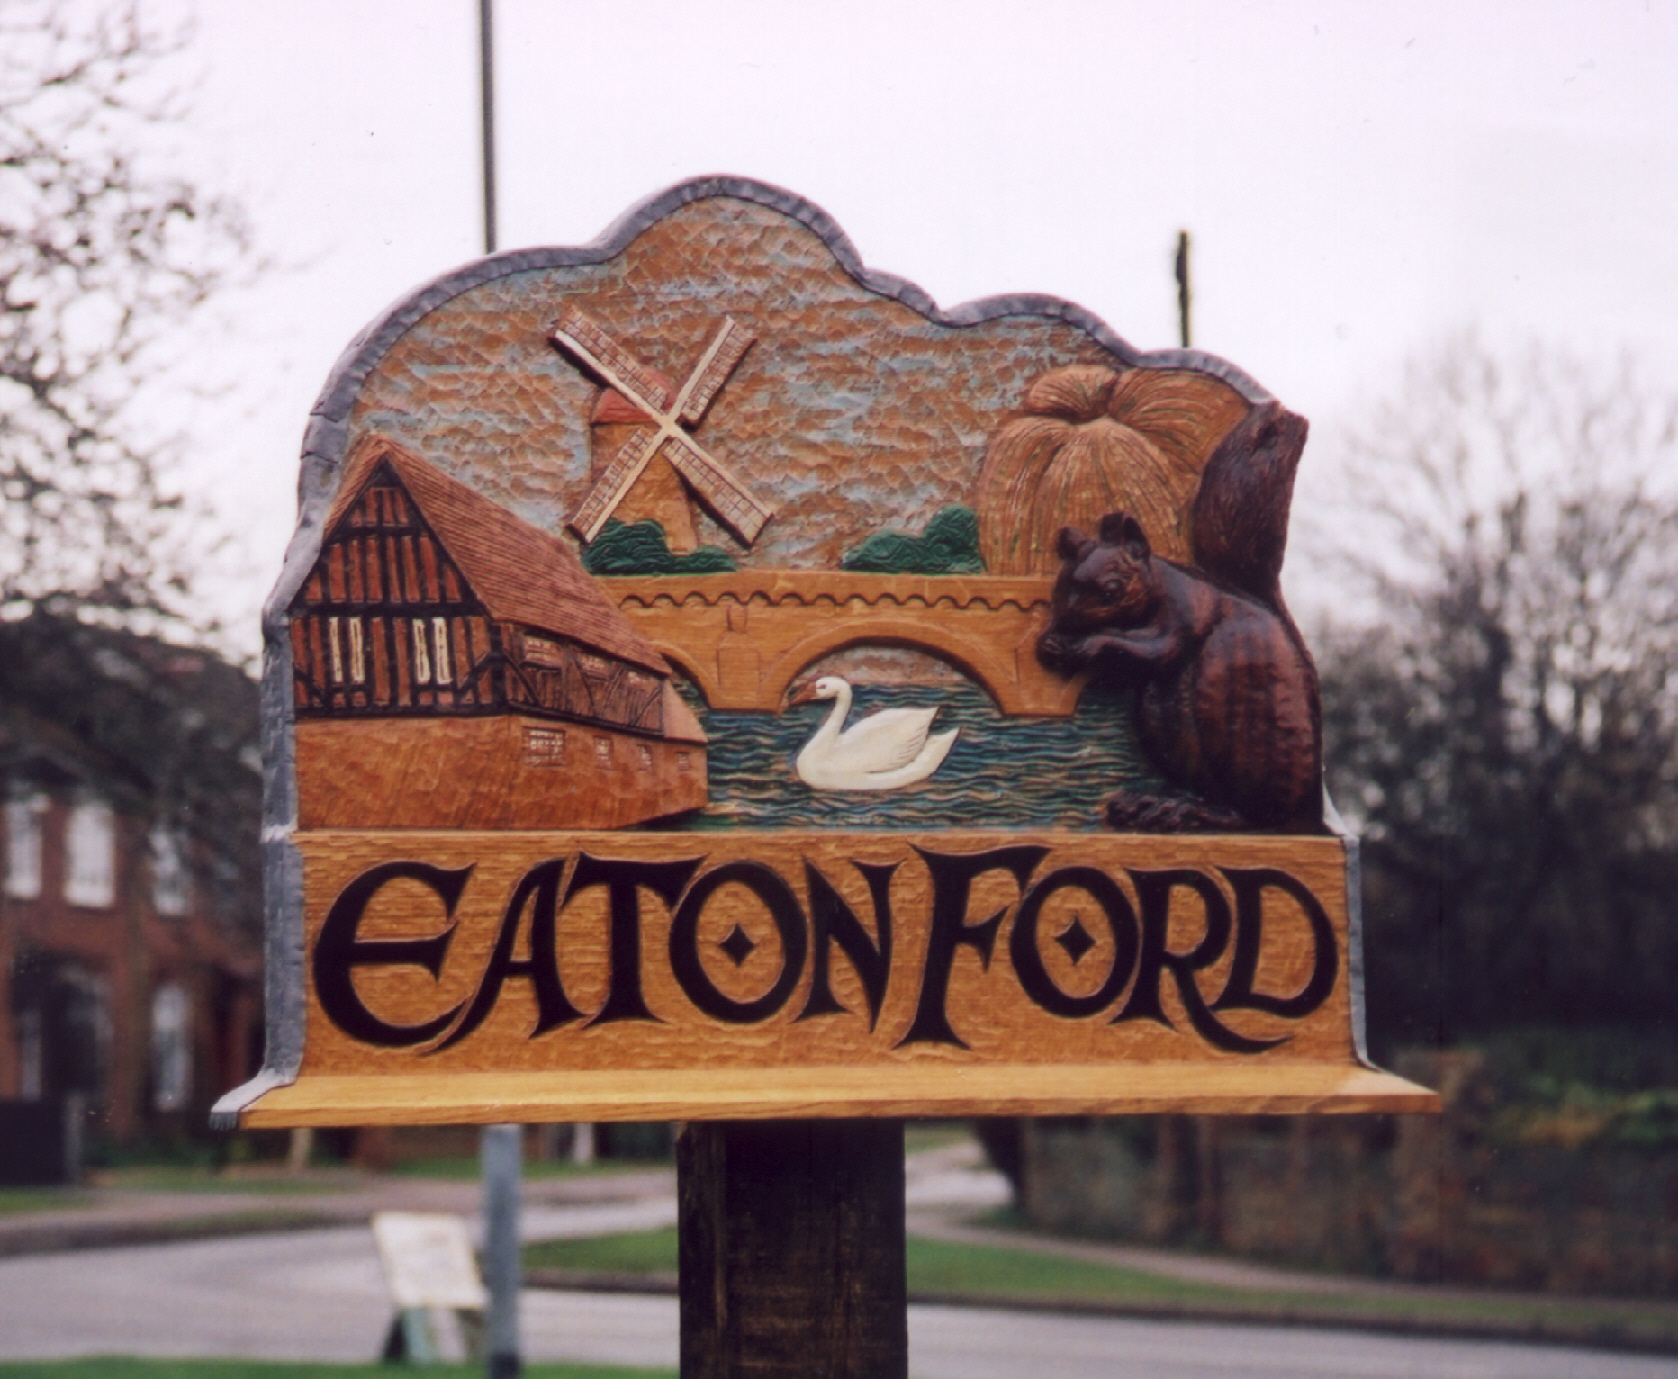 Eaton ford st neots #7